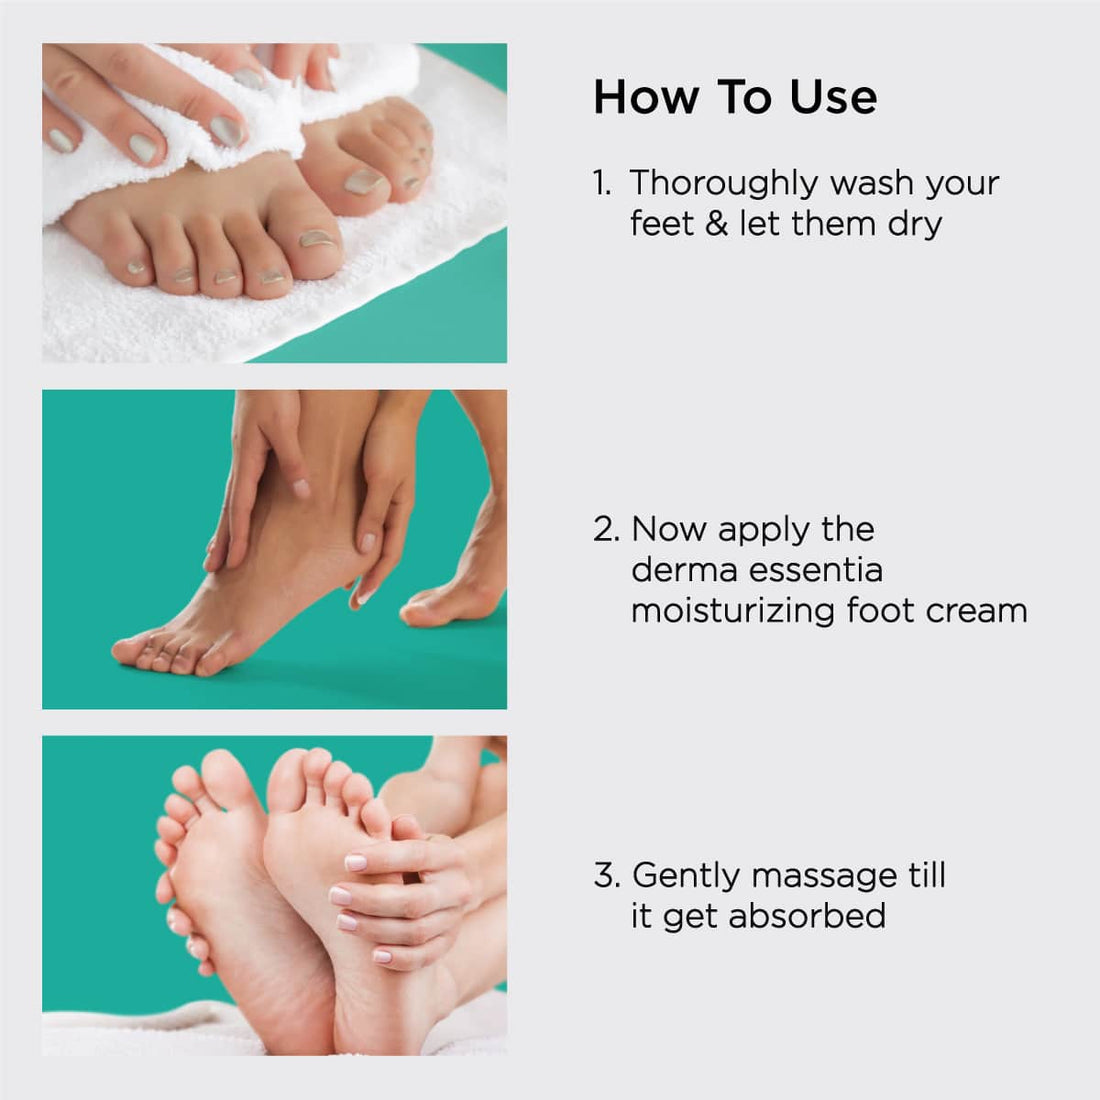 How to use foot cream